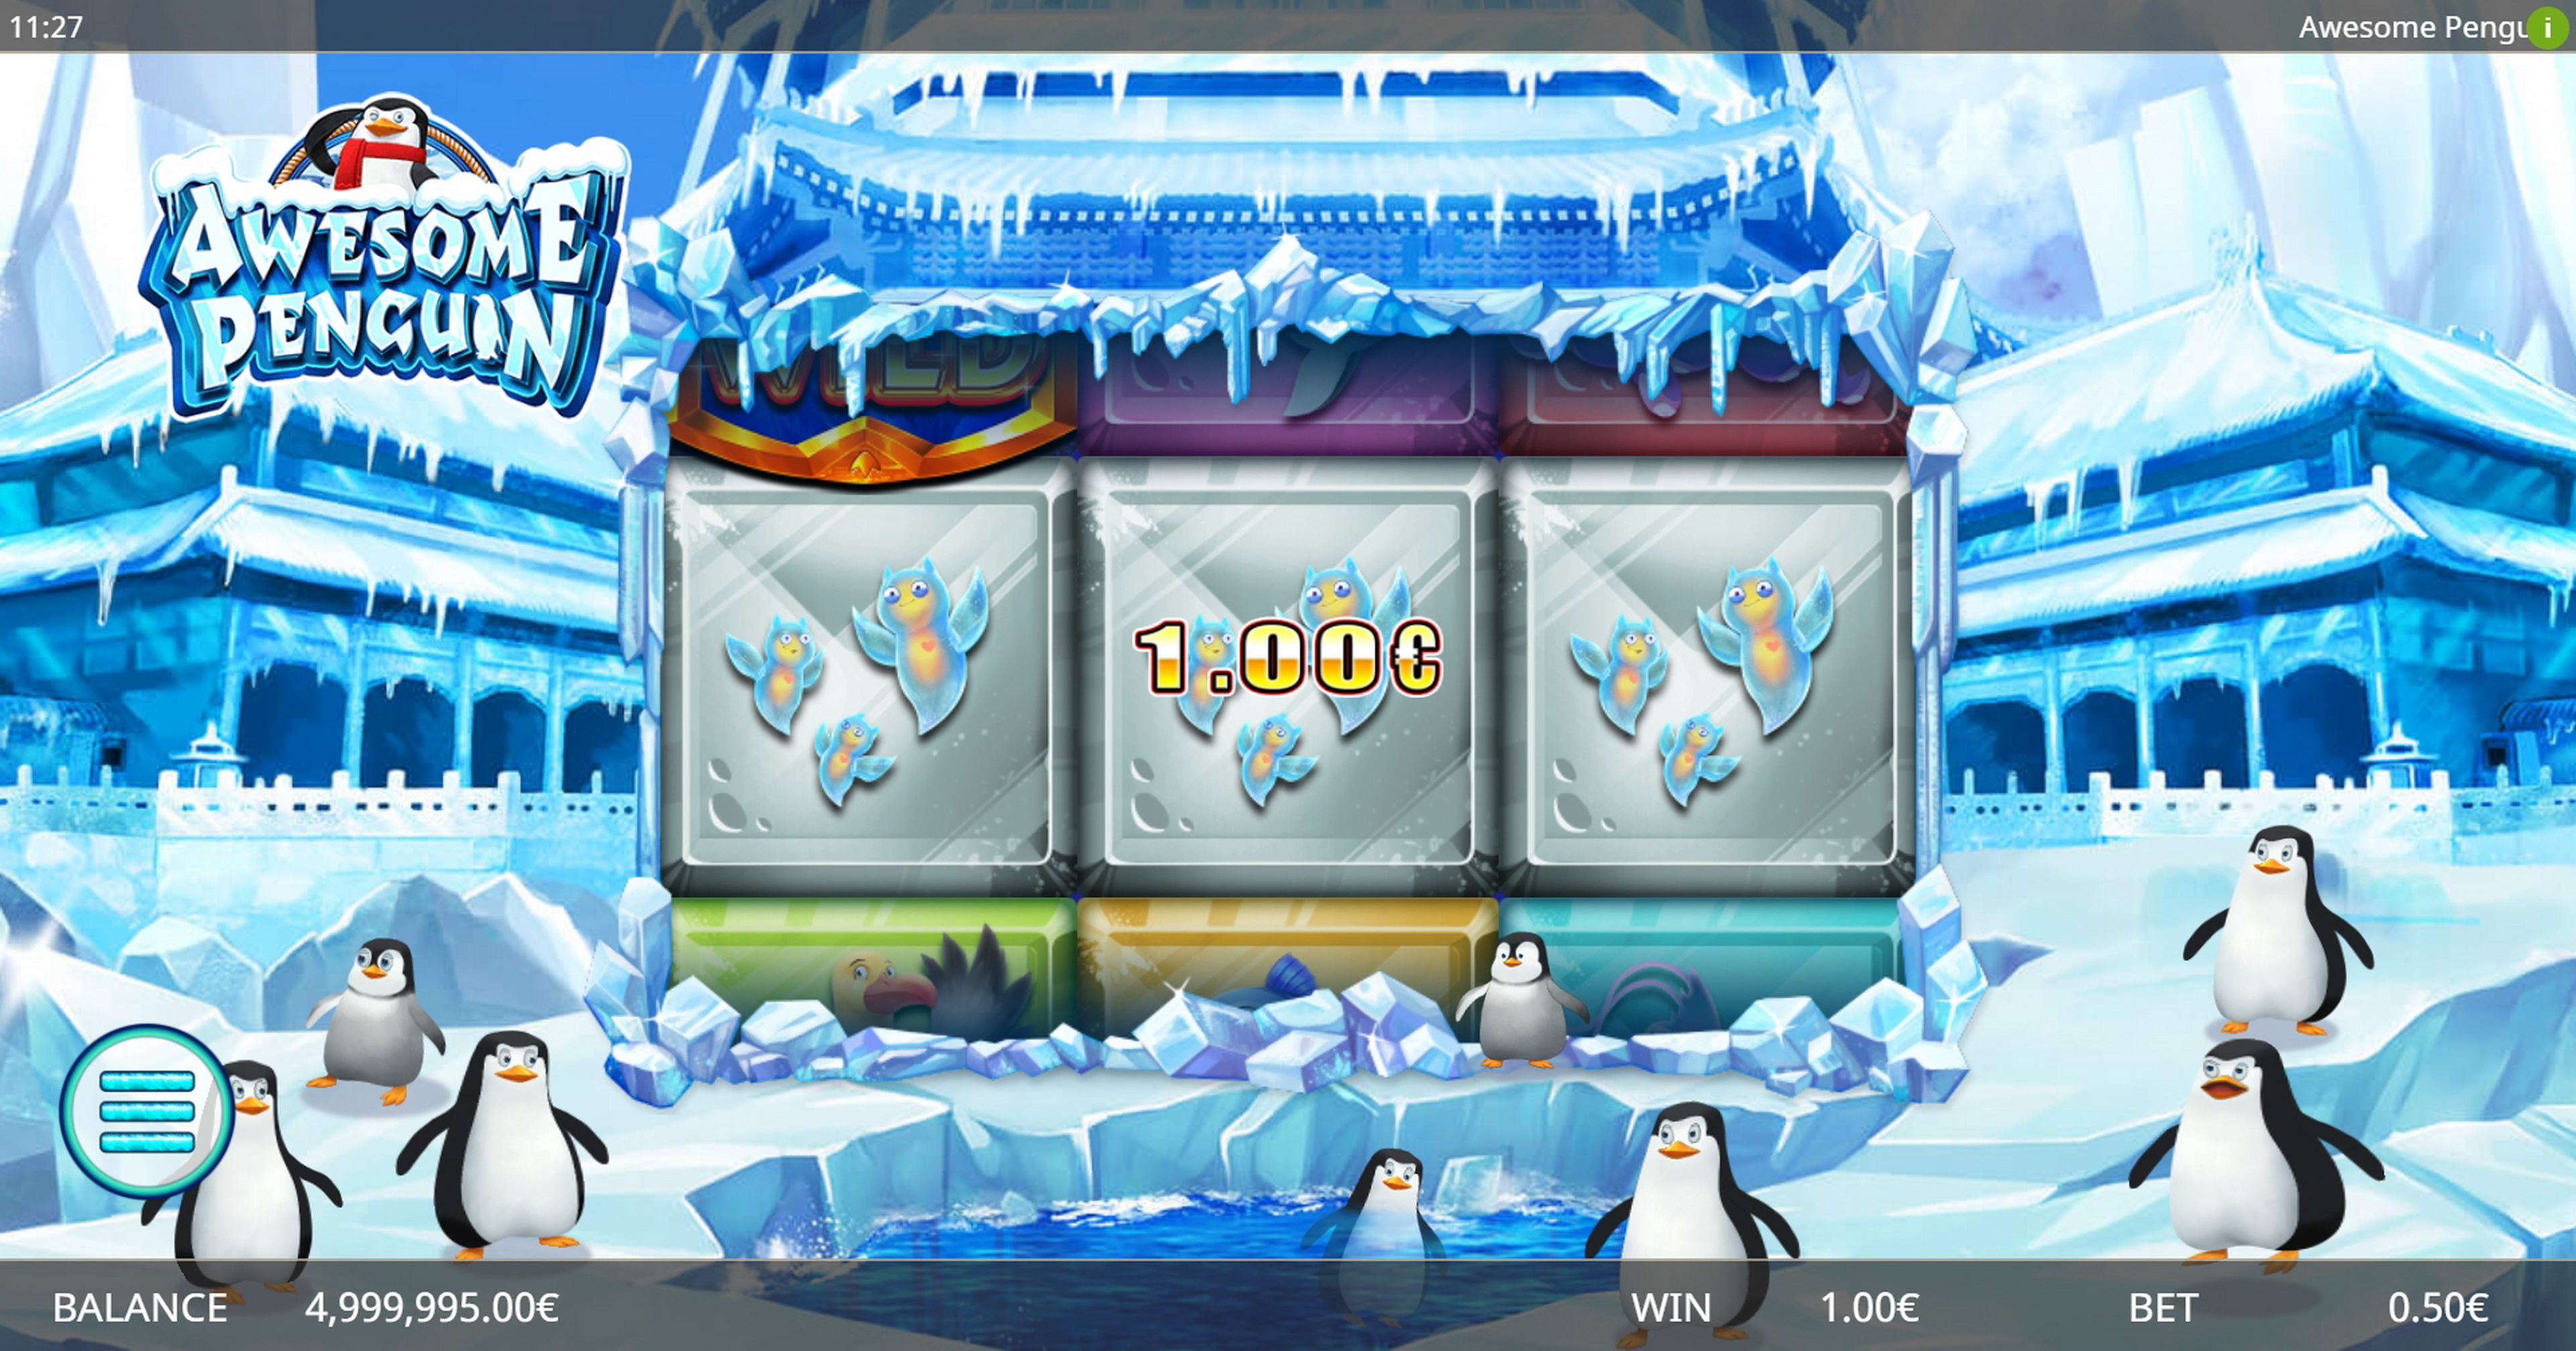 Win Money in Awesome Penguin Free Slot Game by Ganapati